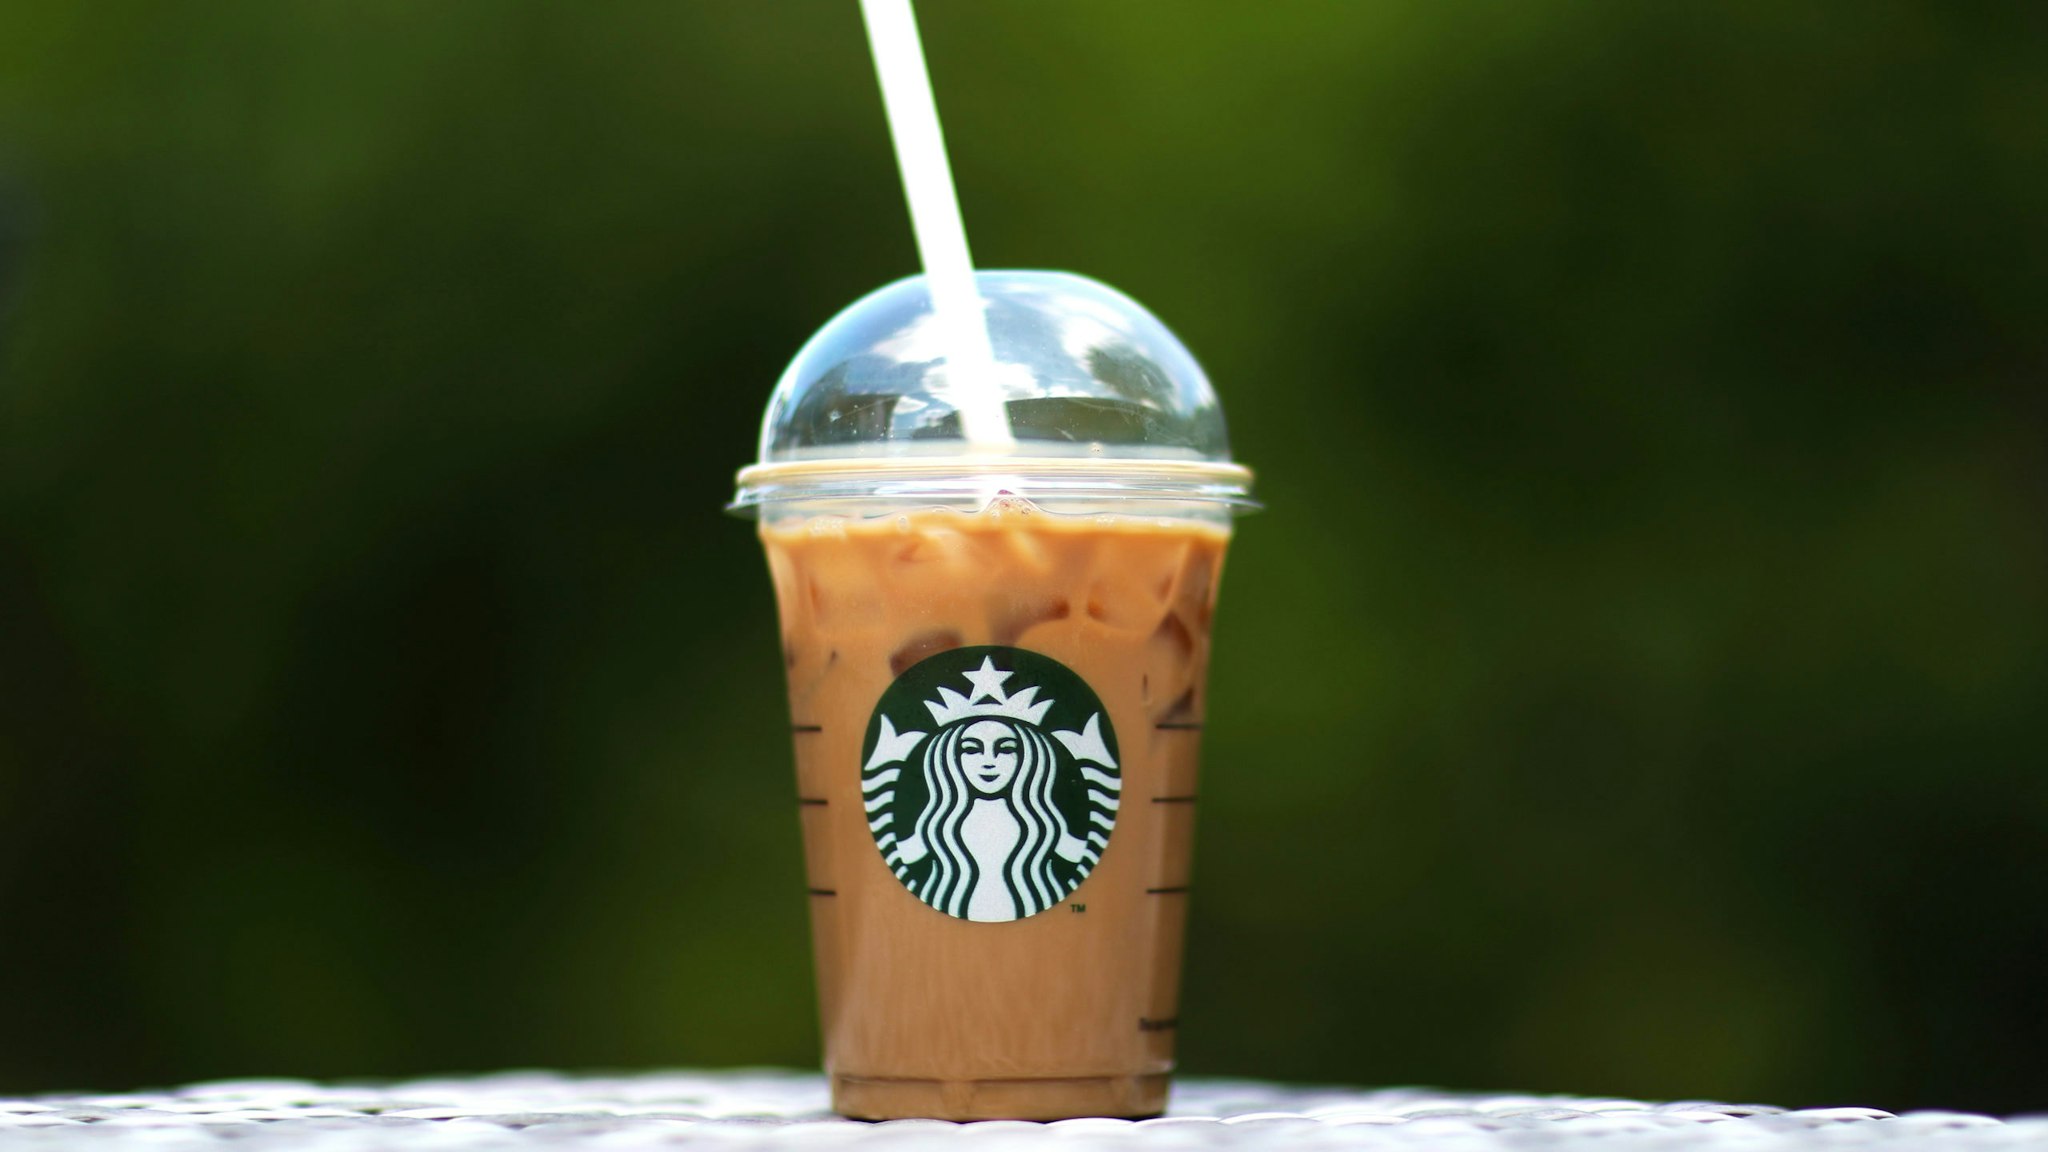 SOUTHAMPTON, ENGLAND - MAY 15: A photo illustration of a beverage from Starbucks in Hedge End, Southampton after the store reopens for take away on May 15, 2020 in Southampton, England . The prime minister announced the general contours of a phased exit from the current lockdown, adopted nearly two months ago in an effort curb the spread of Covid-19.